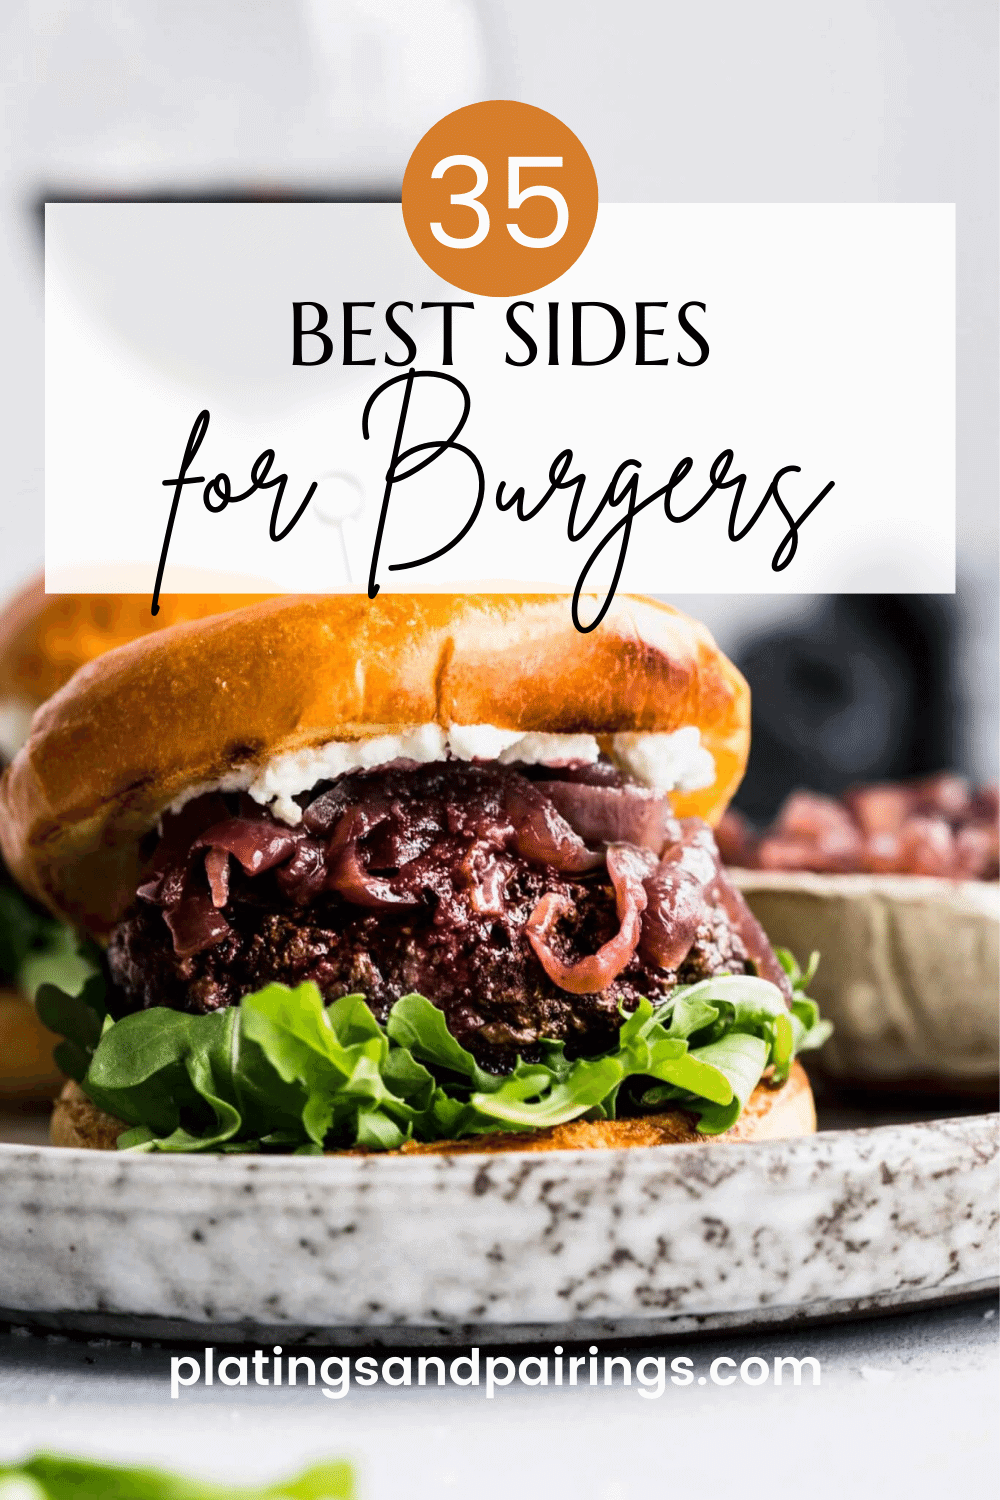 35 BEST Sides for Burgers (What to Serve with Hamburgers)